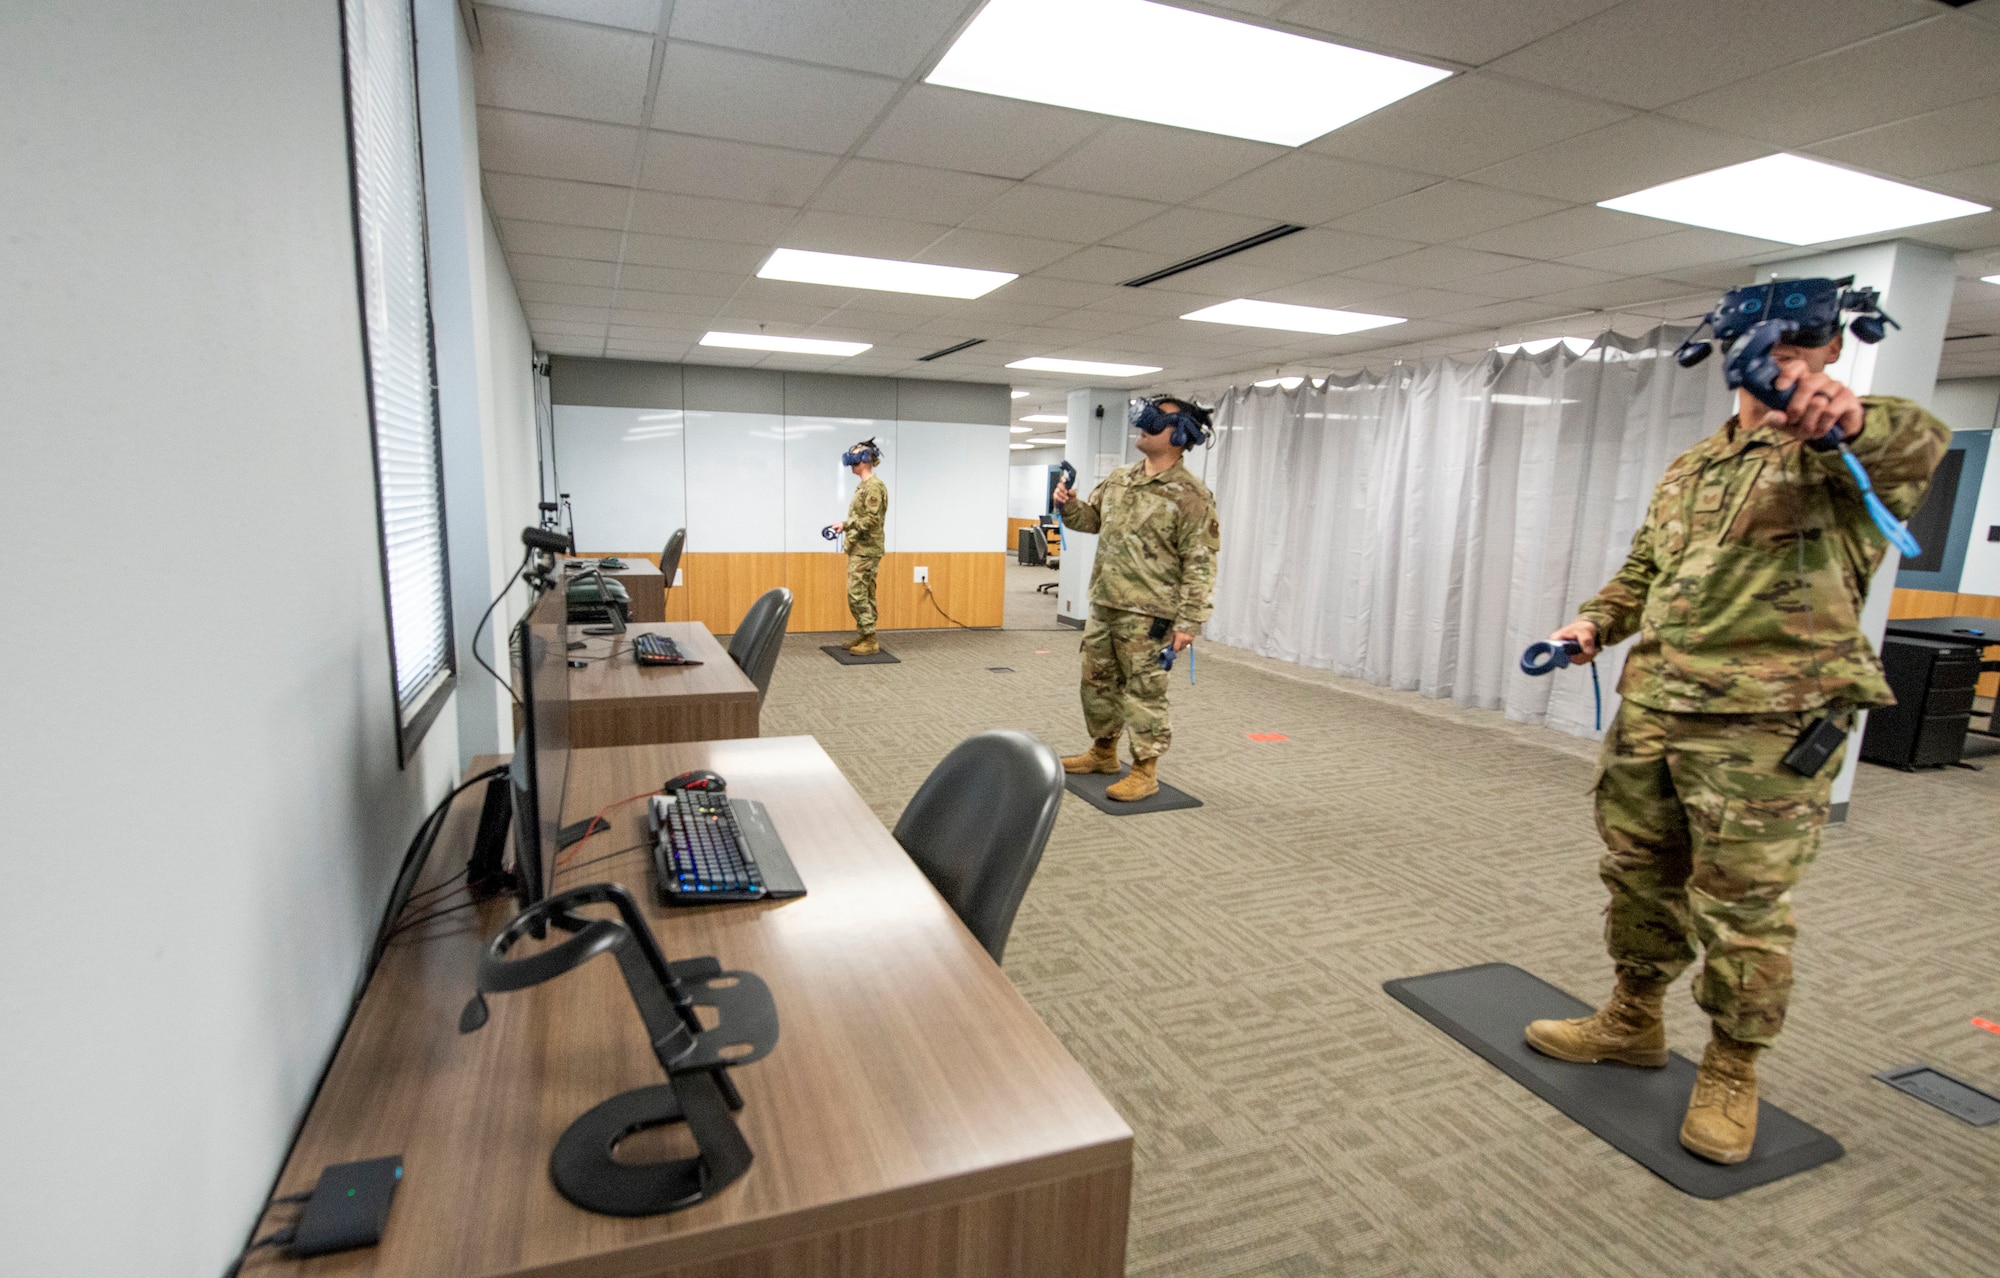 Air Force Tech Sgt. Casey Michalski (left), Staff Sgt. Kevin Lassen, and Staff Sgt. Renee Scherf, Detachment 23 curriculum engineers, test virtual reality training systems. Members of Detachment 23’s Tech Training Transformation are part of Air Education and Training Command and responsible for re-engineering tech training. Their cutting-edge program utilizes virtual reality training systems and artificial intelligence, among other modalities, to transform the Airmen development process. (Photo by Air Force Staff Sgt Keith James)